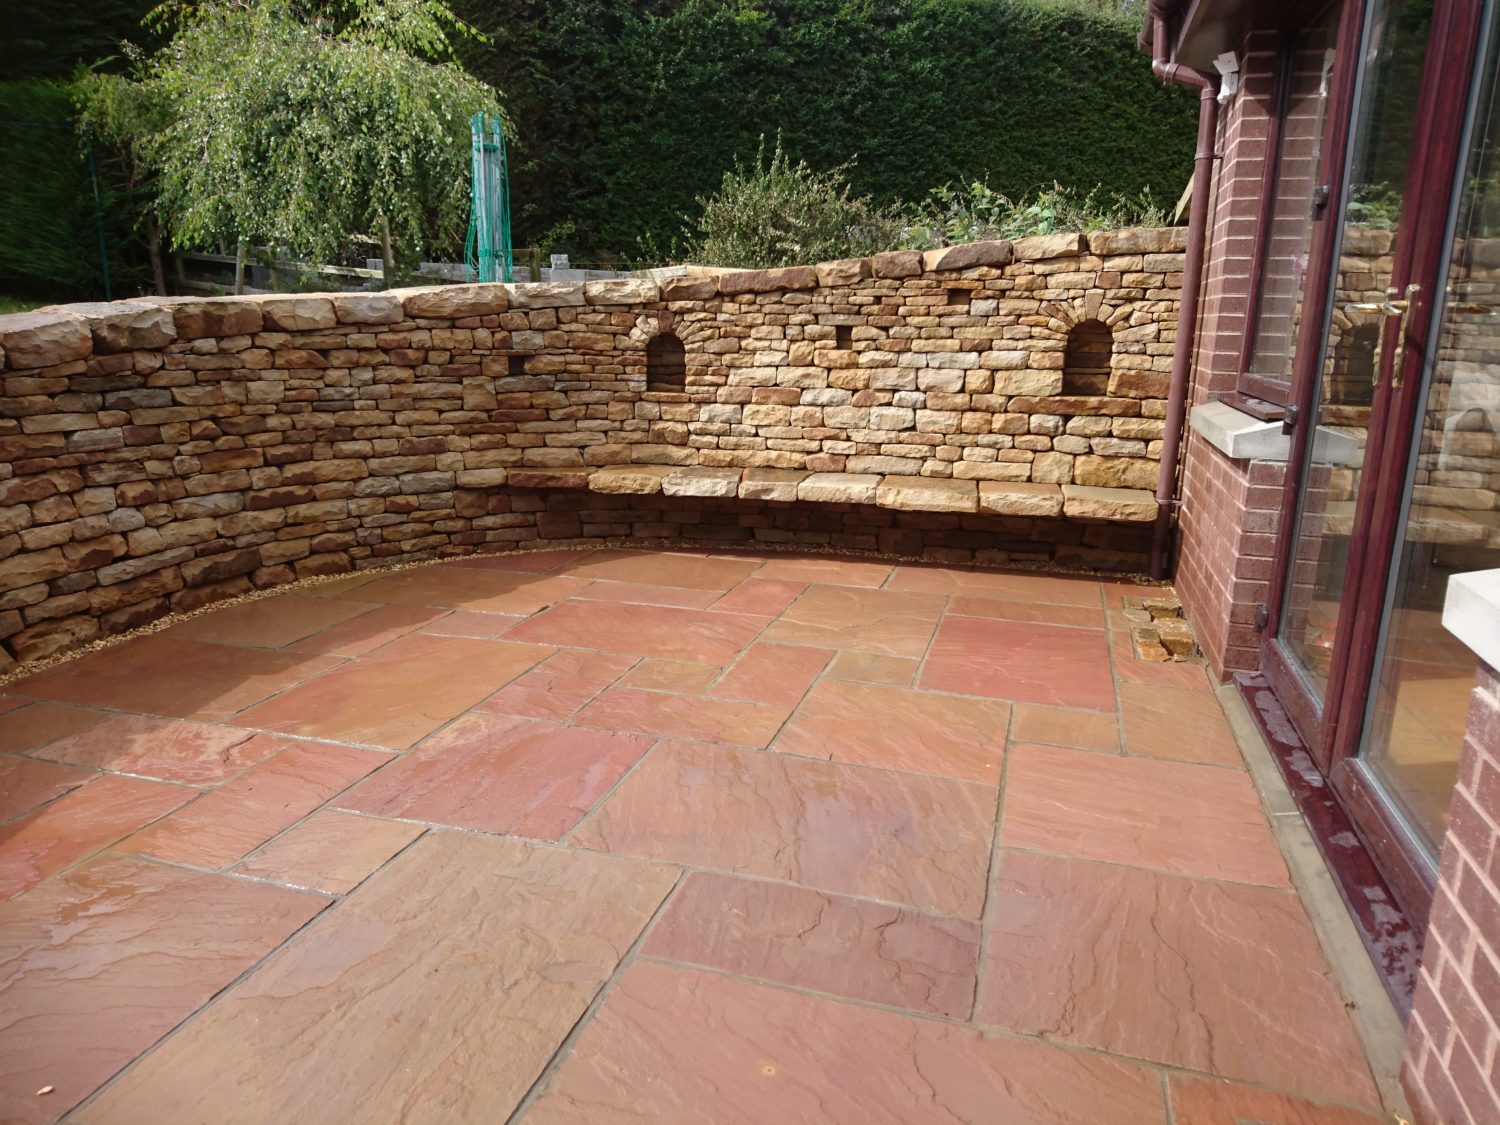 Dry stone bench and paving